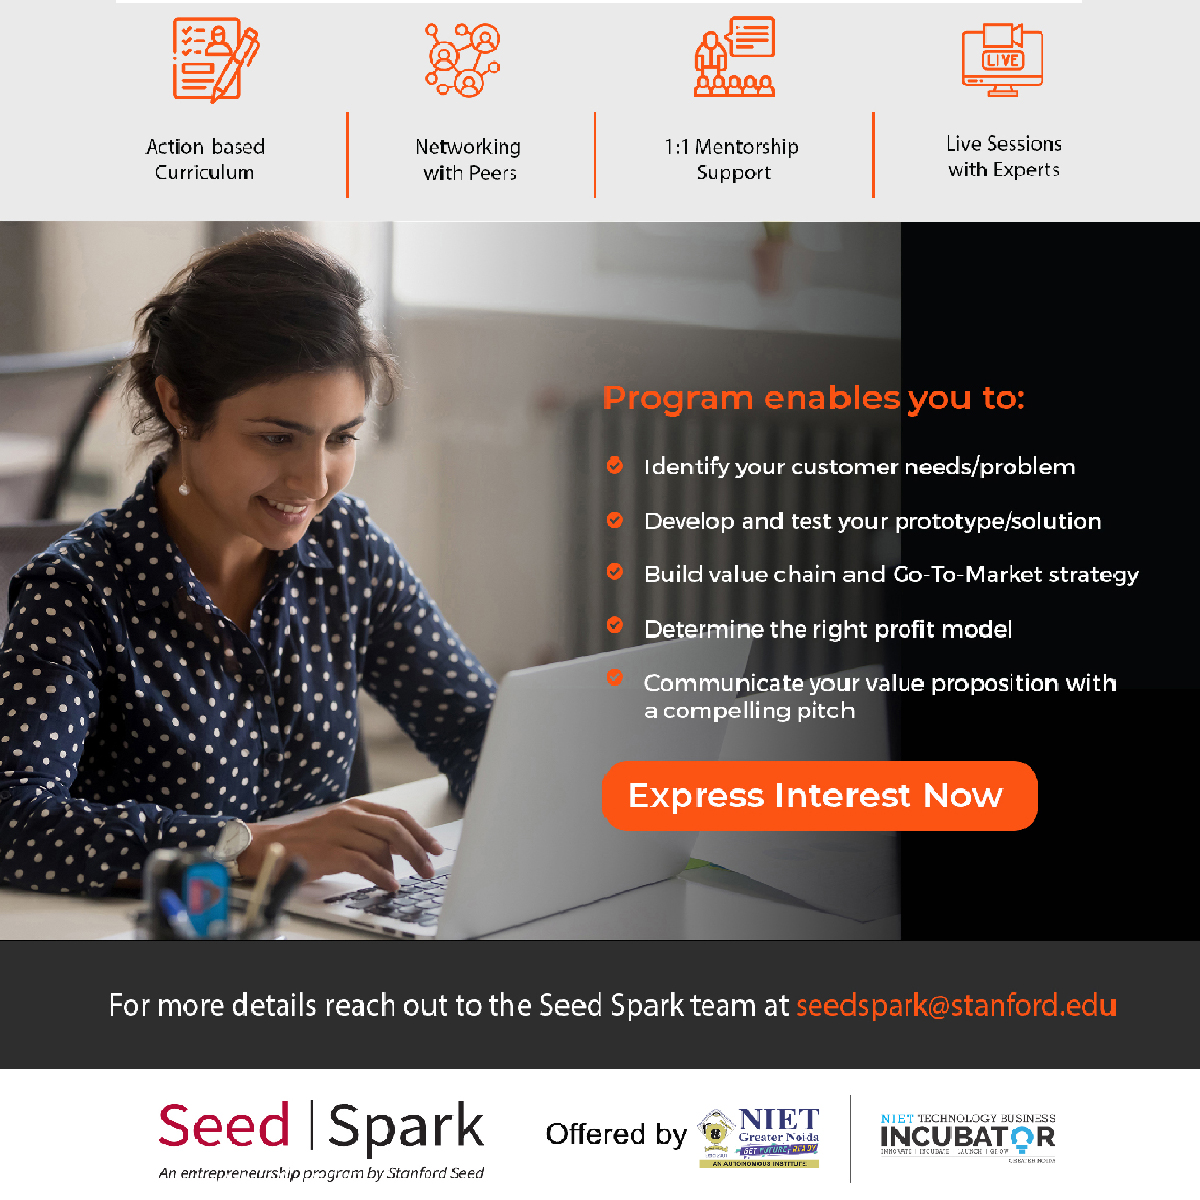 It's our pleasure to have a significant collaboration with Stanford Seed for Stanford Seed Spark program for empowering Entrepreneurs through an online platform.

#NIET #nietgreaternoida #StanfordSeedSpark #Entrepreneurship #EmpoweringEntrepreneurs  #thinkplacementthinkniet